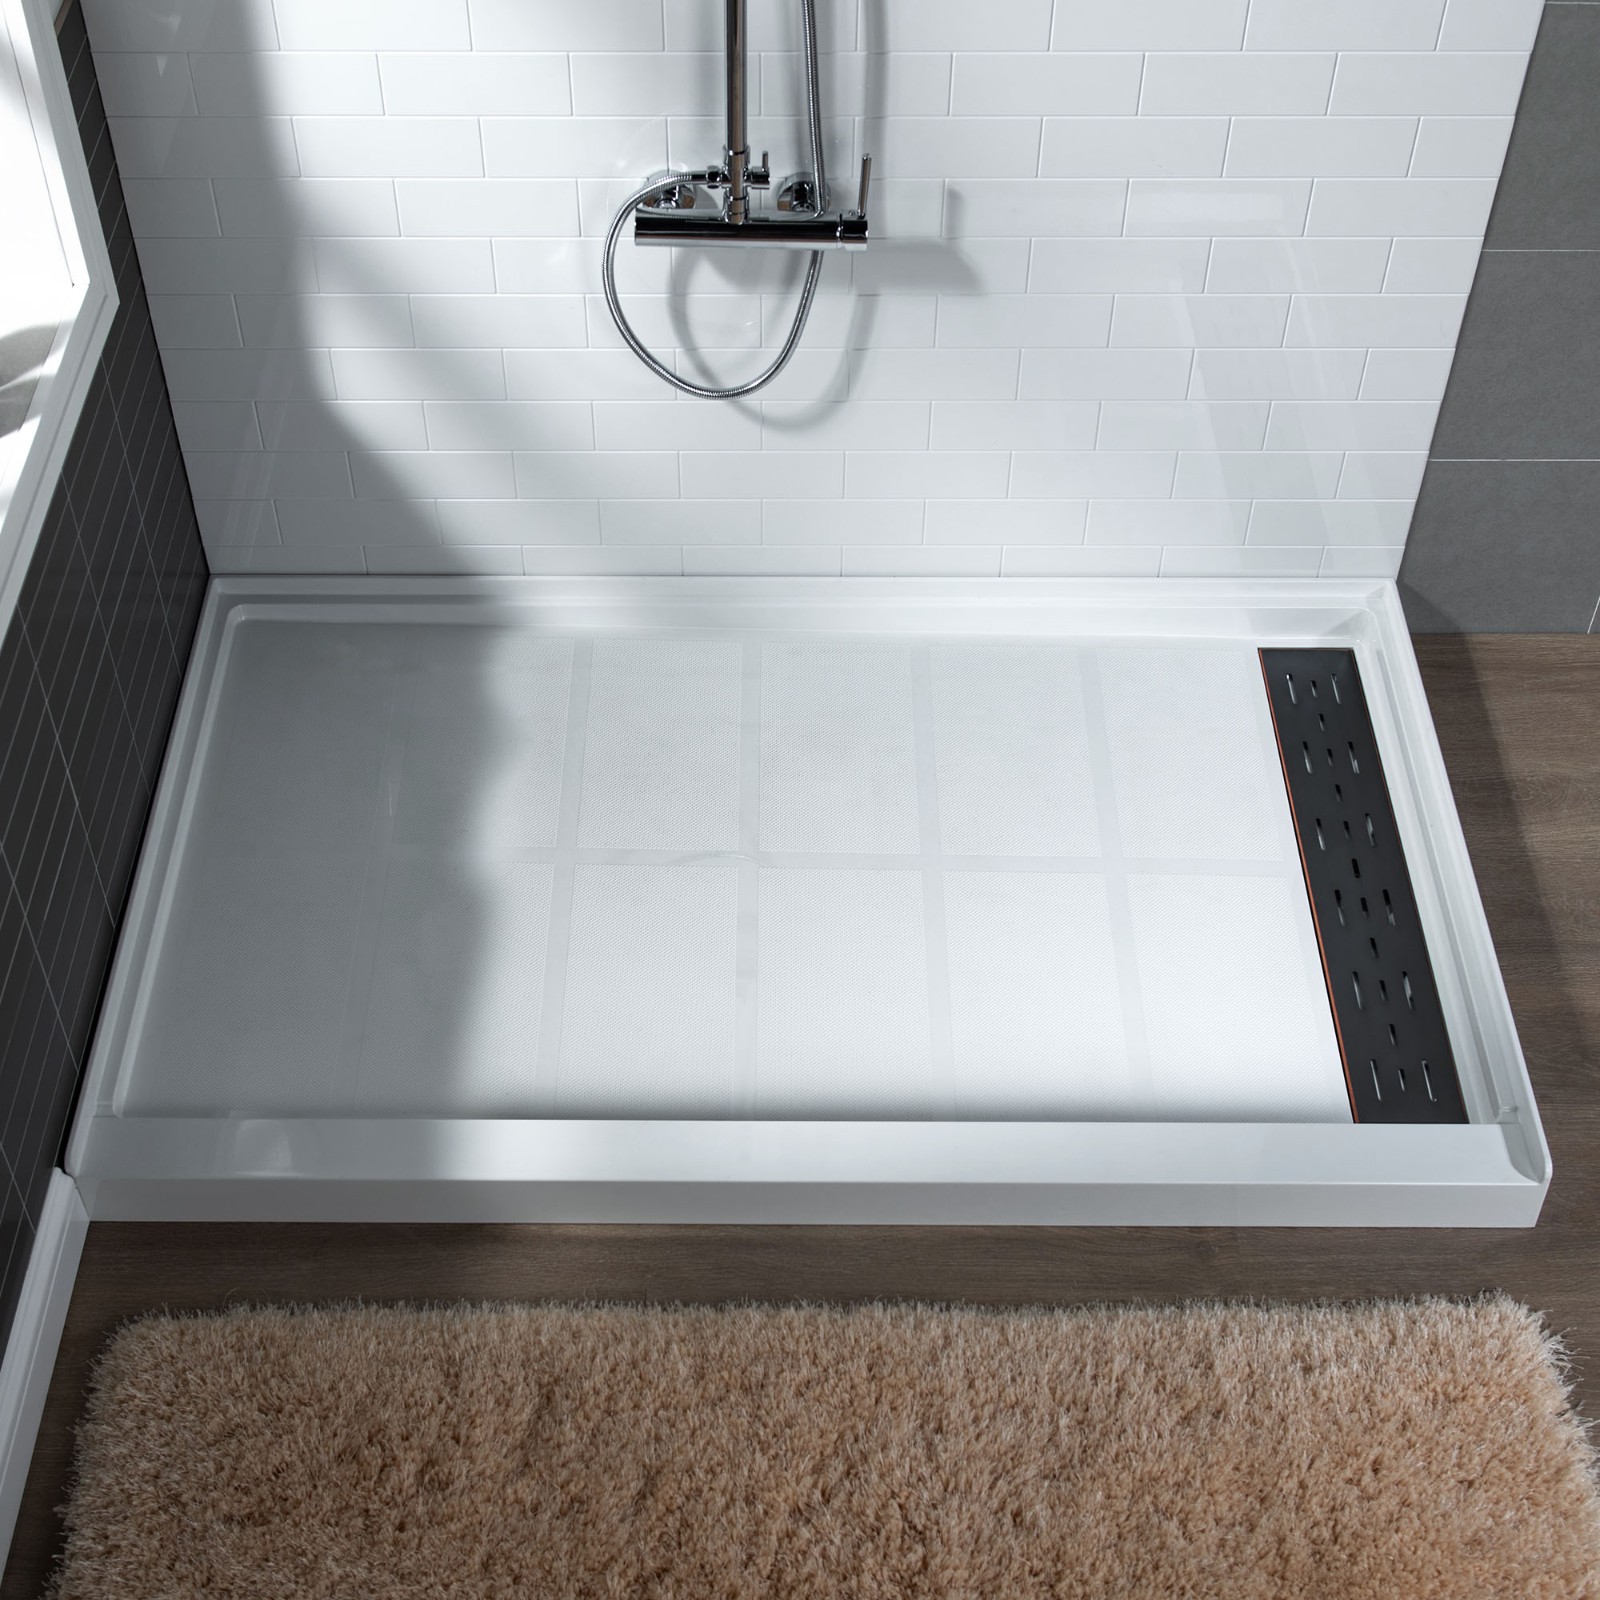  WOODBRIDGE SBR6036-1000R-ORB SolidSurface Shower Base with Recessed Trench Side Including Oil Rubbed Bronze Linear Cover, 60